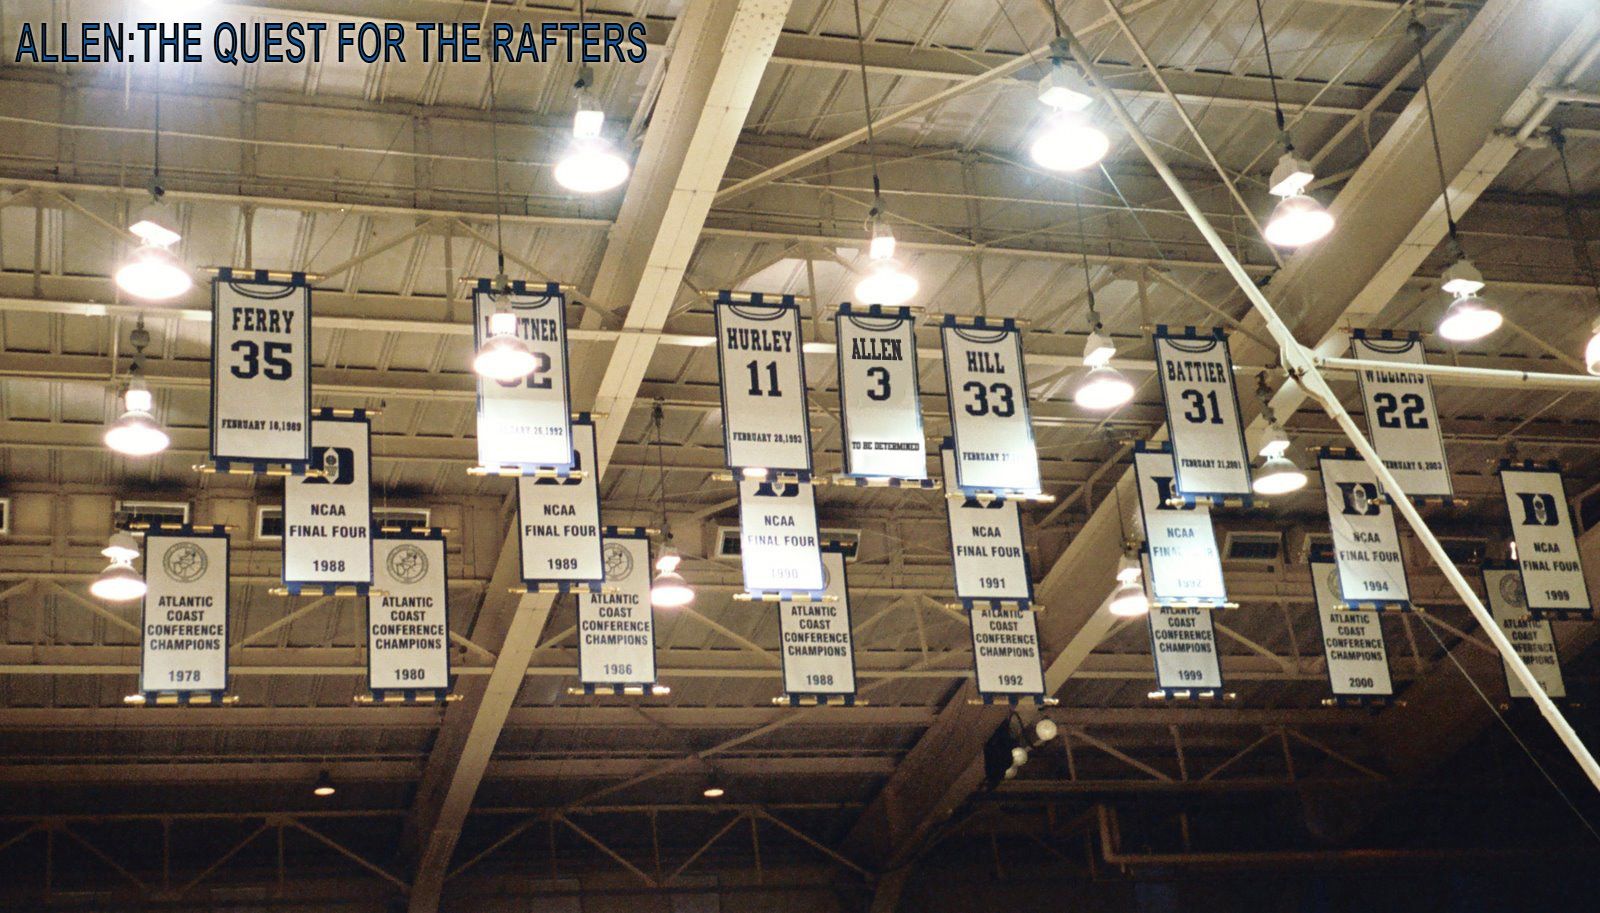 Grayson%20Allen%20Quest%20for%20the%20Rafters.jpg